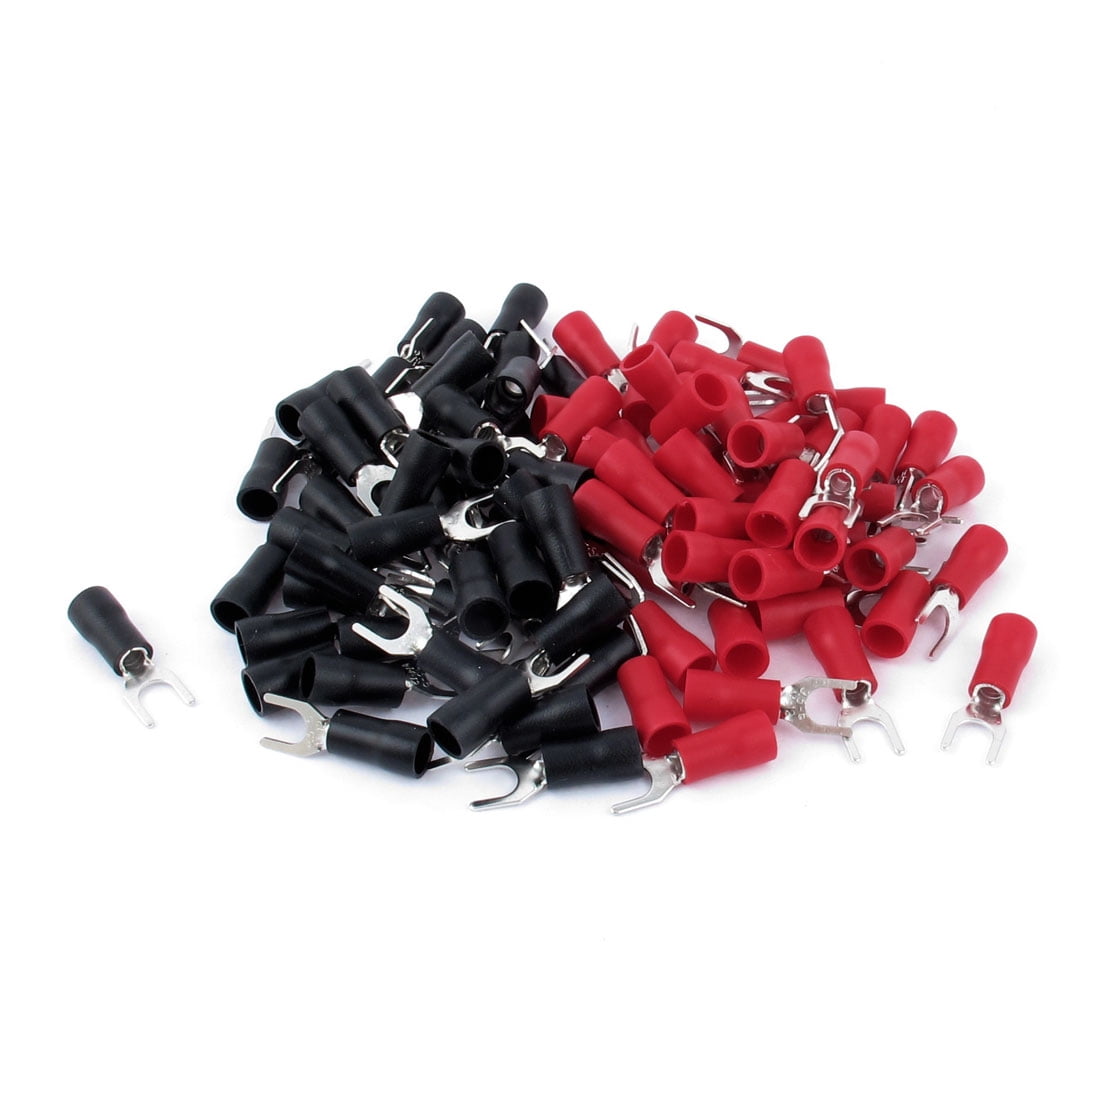 100pcs 4 Gauge Crimp Silver SPADE FORK Terminals Connector Wire Cable RED Boots 